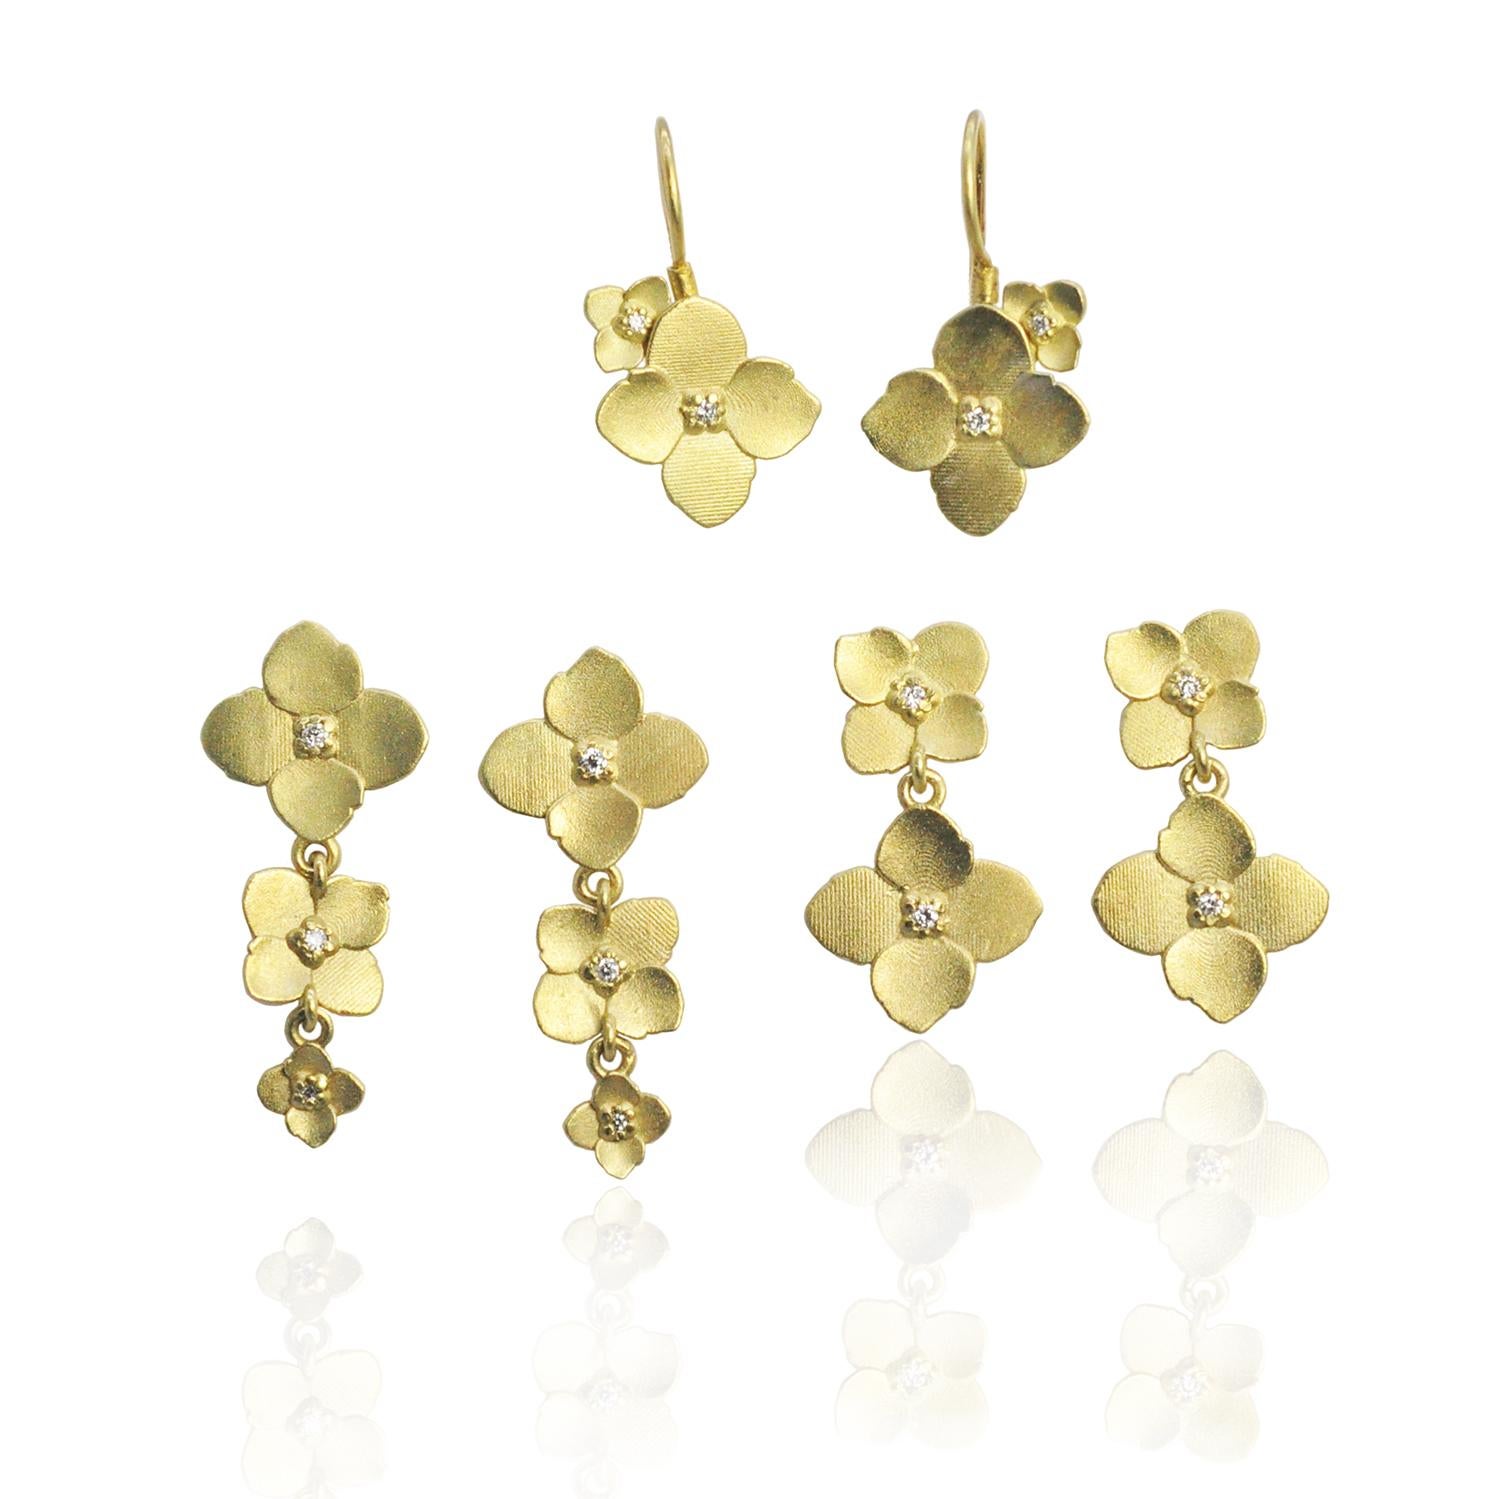 A sweet pair of hydrangea flower earrings in 18k gold with diamonds. A duo of hydrangea flowers, one large and one small, blooms on each wire earring.  

We also offer gold hydrangea flower earrings in two different post styles. Check out our